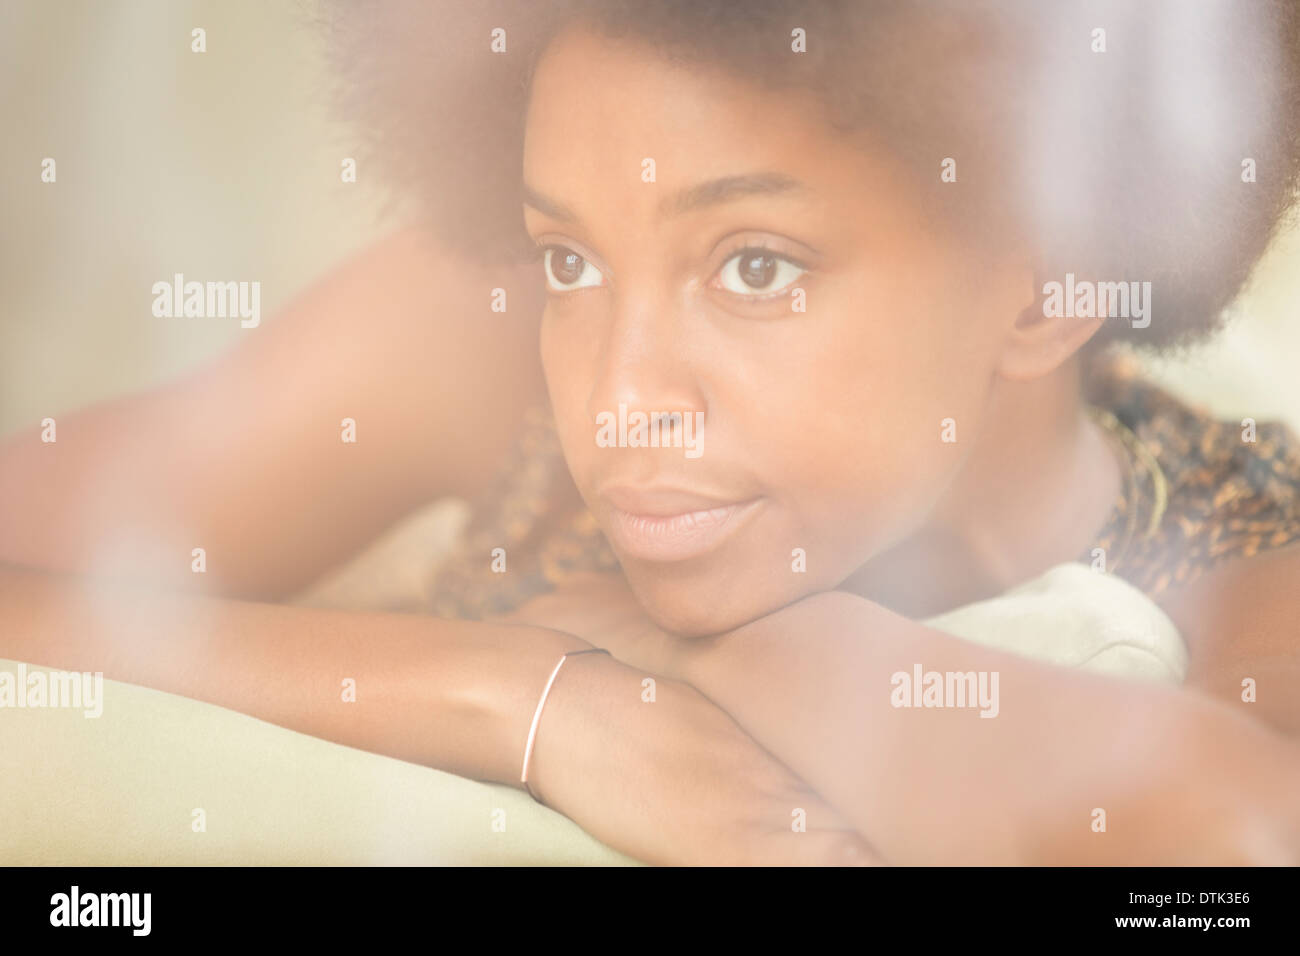 Woman resting chin in hands Stock Photo